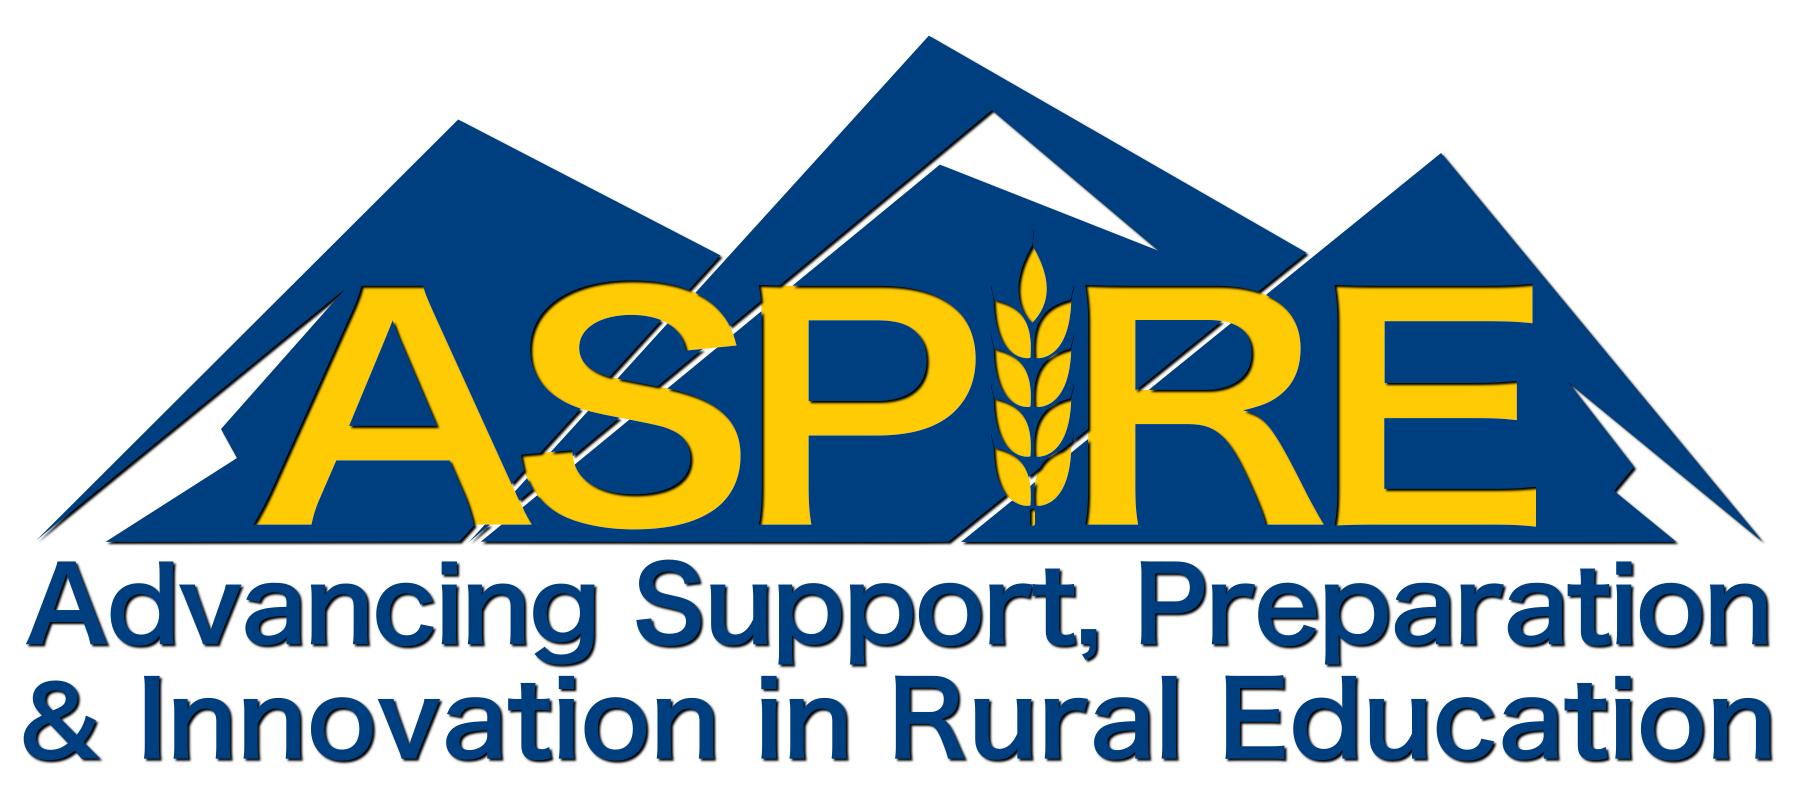 Advancing Support, Preparation, and Innovation in Rural Education logo of three mountains